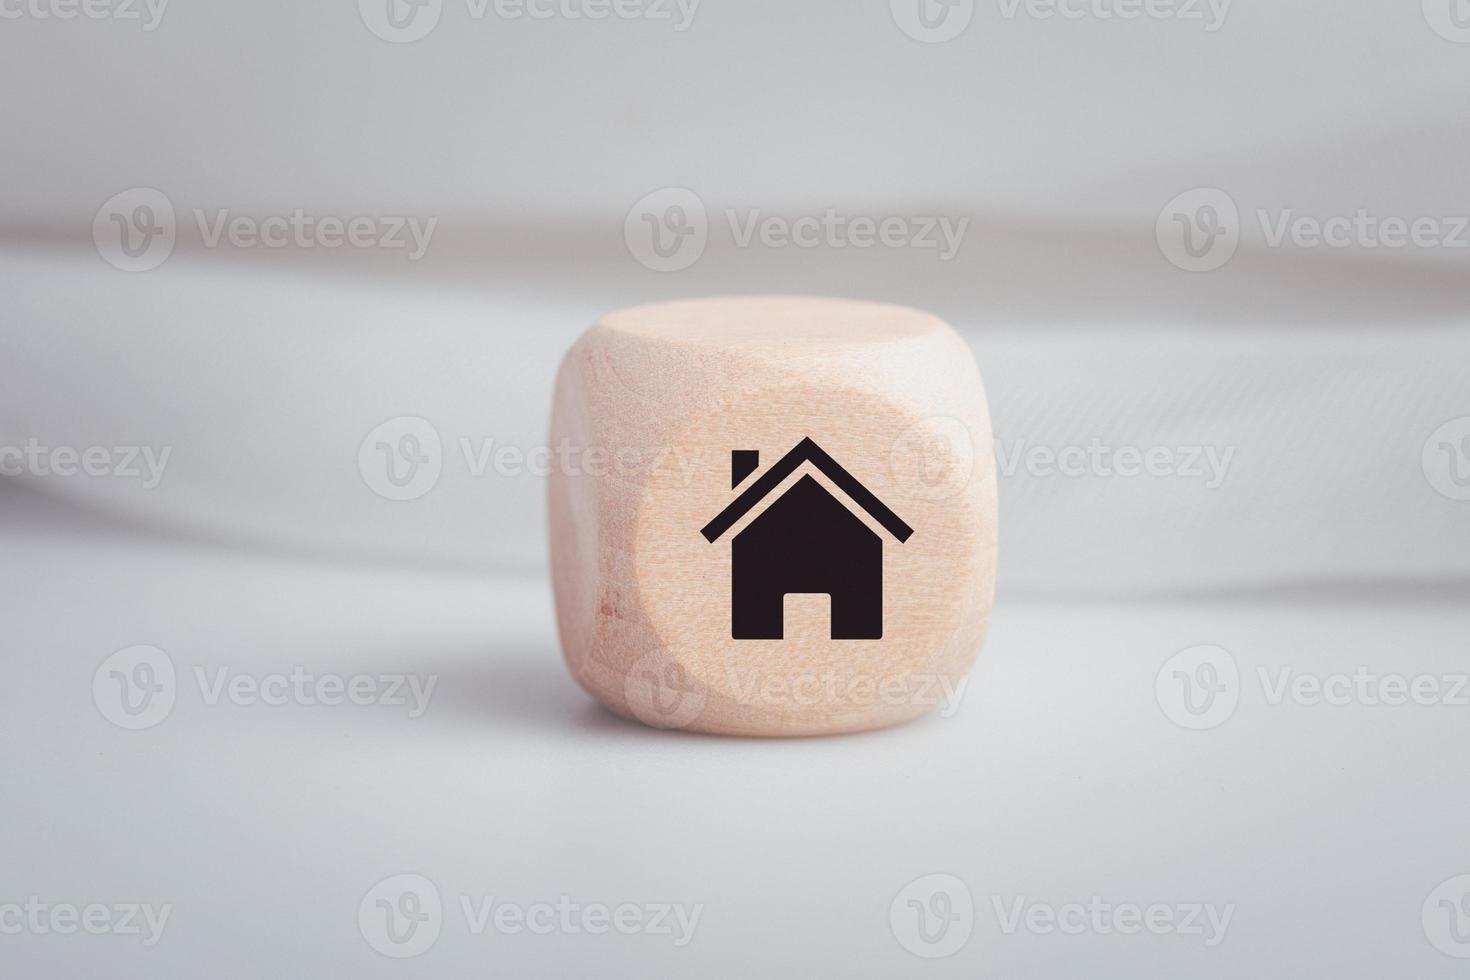 Wooden dice with house symbols on them in a conceptual image. photo